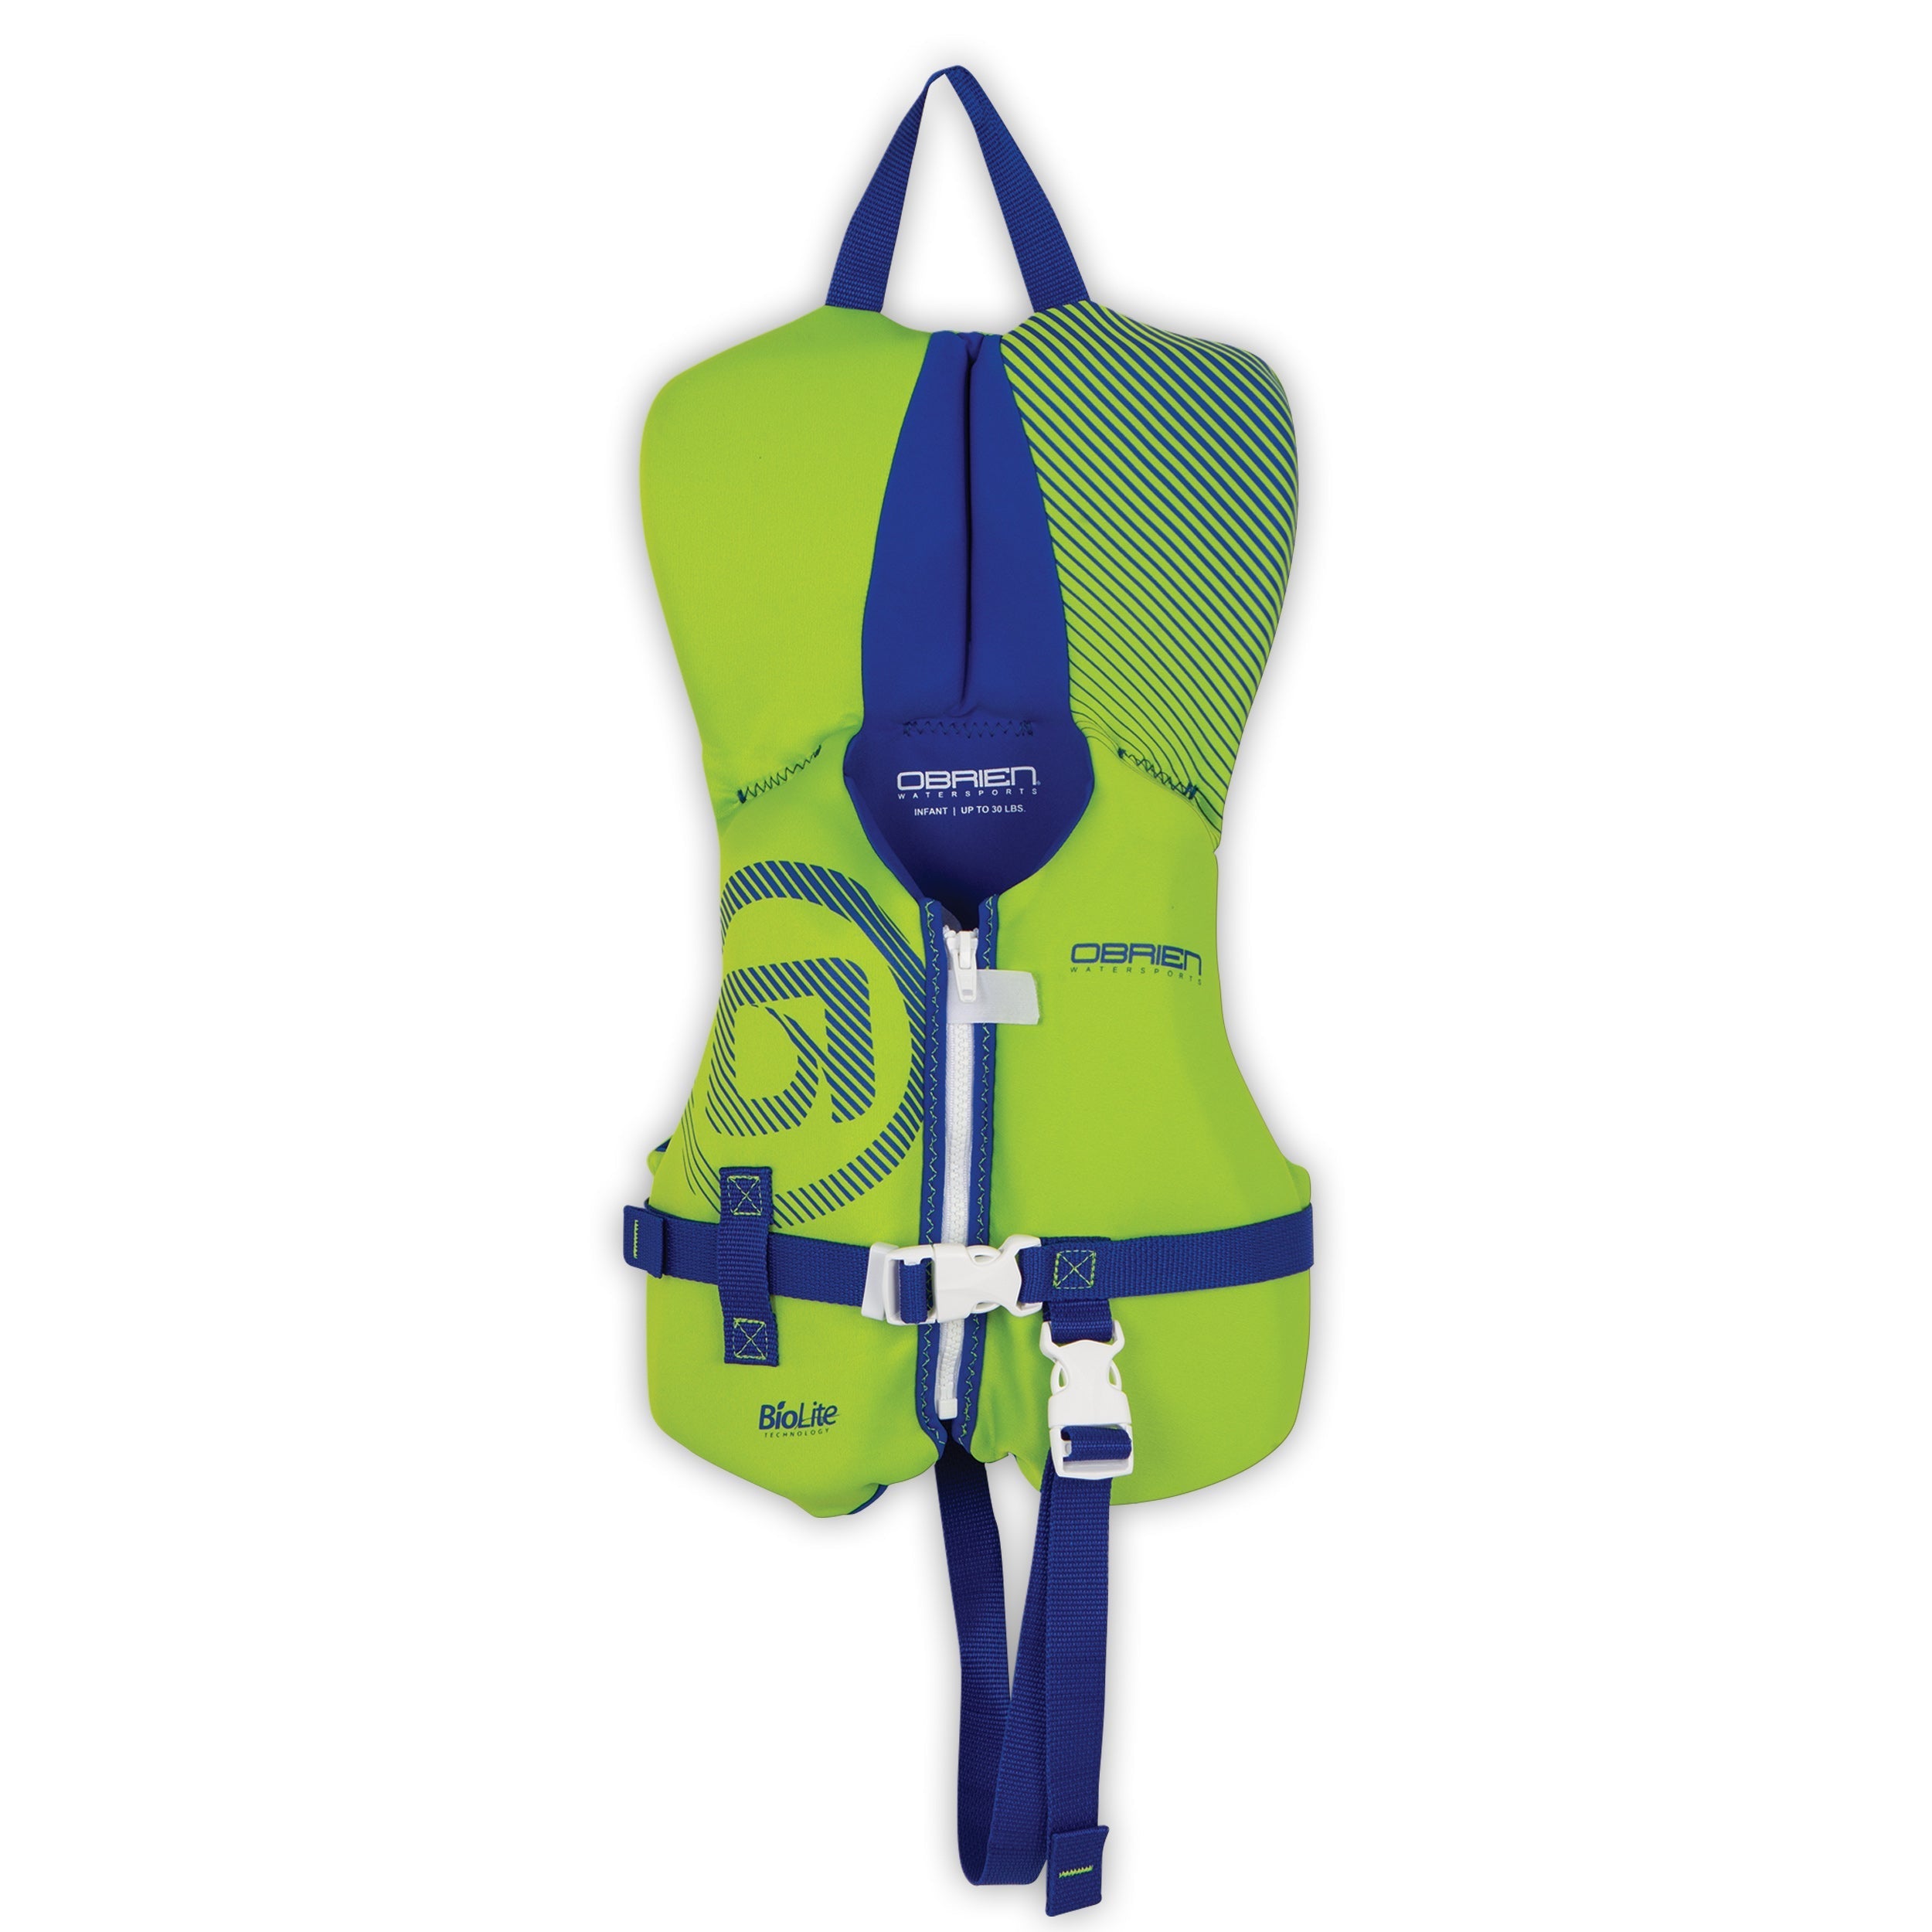 O'Brien Infant Neo Life Jacket in green and blue